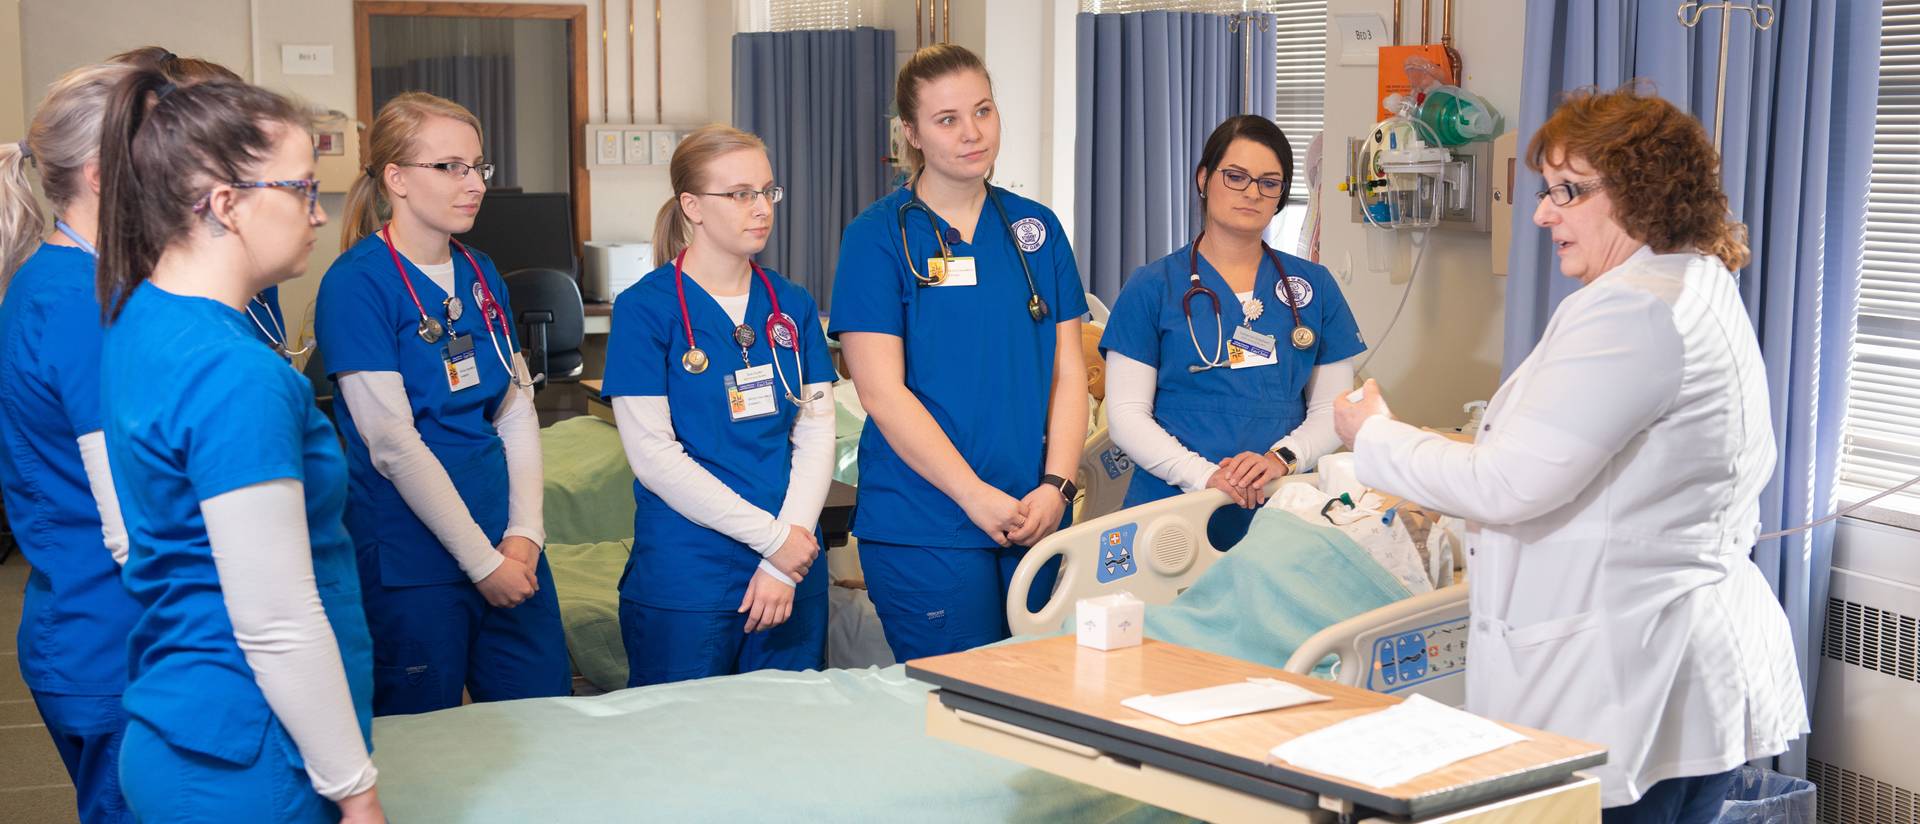 Nursing students standing around a hospital bed looking at the instructor demonstrating with a patient.